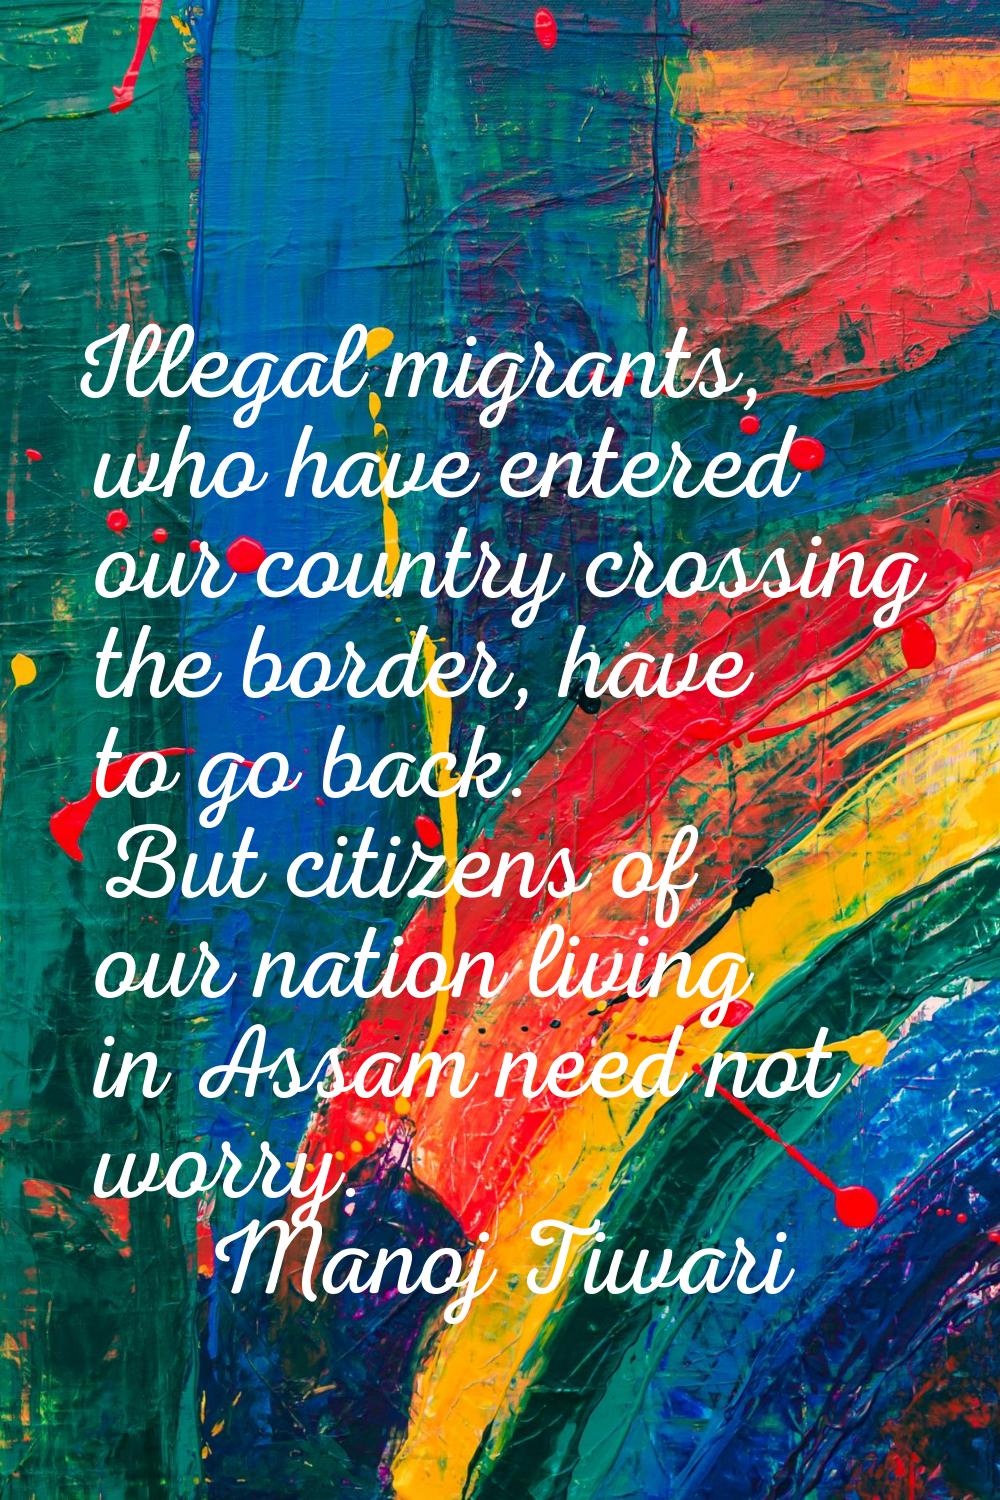 Illegal migrants, who have entered our country crossing the border, have to go back. But citizens o